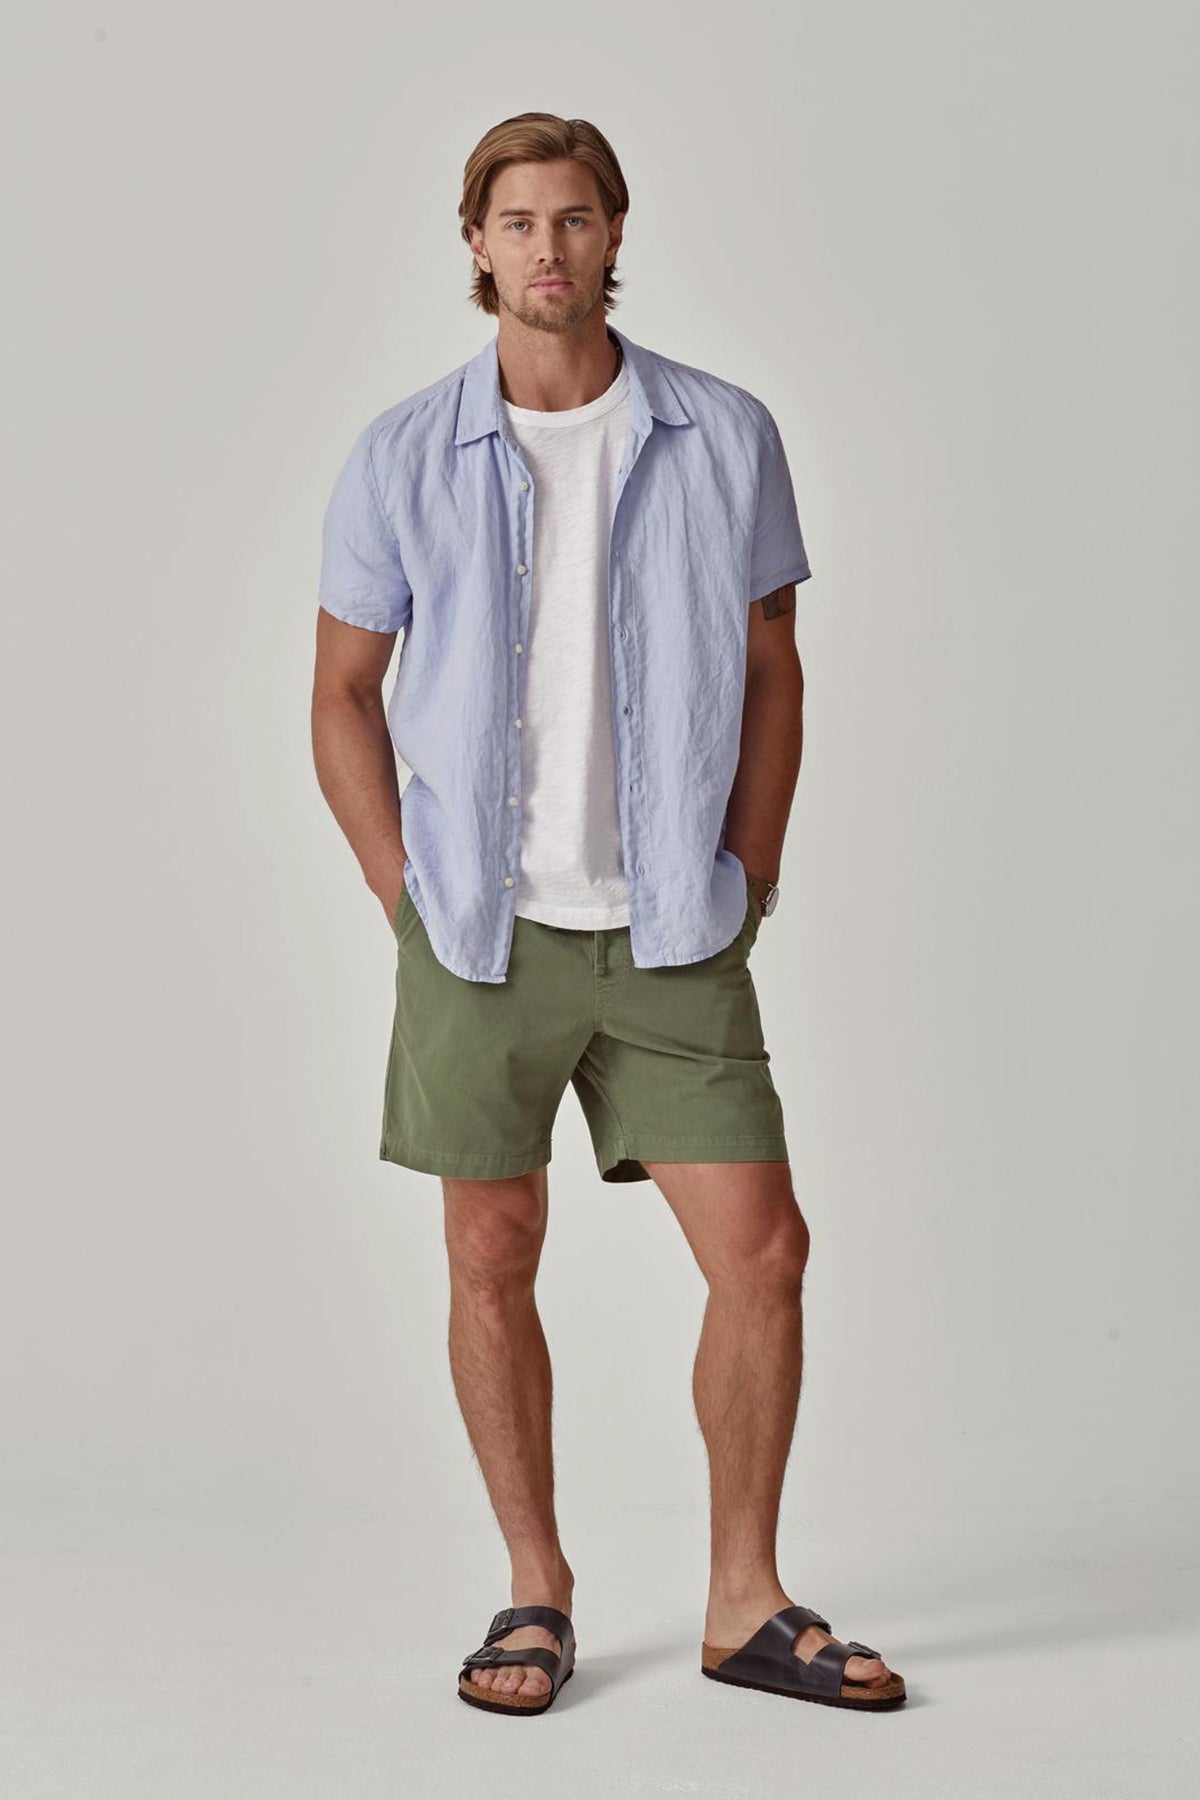 A man with shoulder-length hair stands wearing a Velvet by Graham & Spencer MACKIE LINEN BUTTON-UP SHIRT over a white t-shirt, green shorts, and black sandals, hands in pockets.-36753546281153